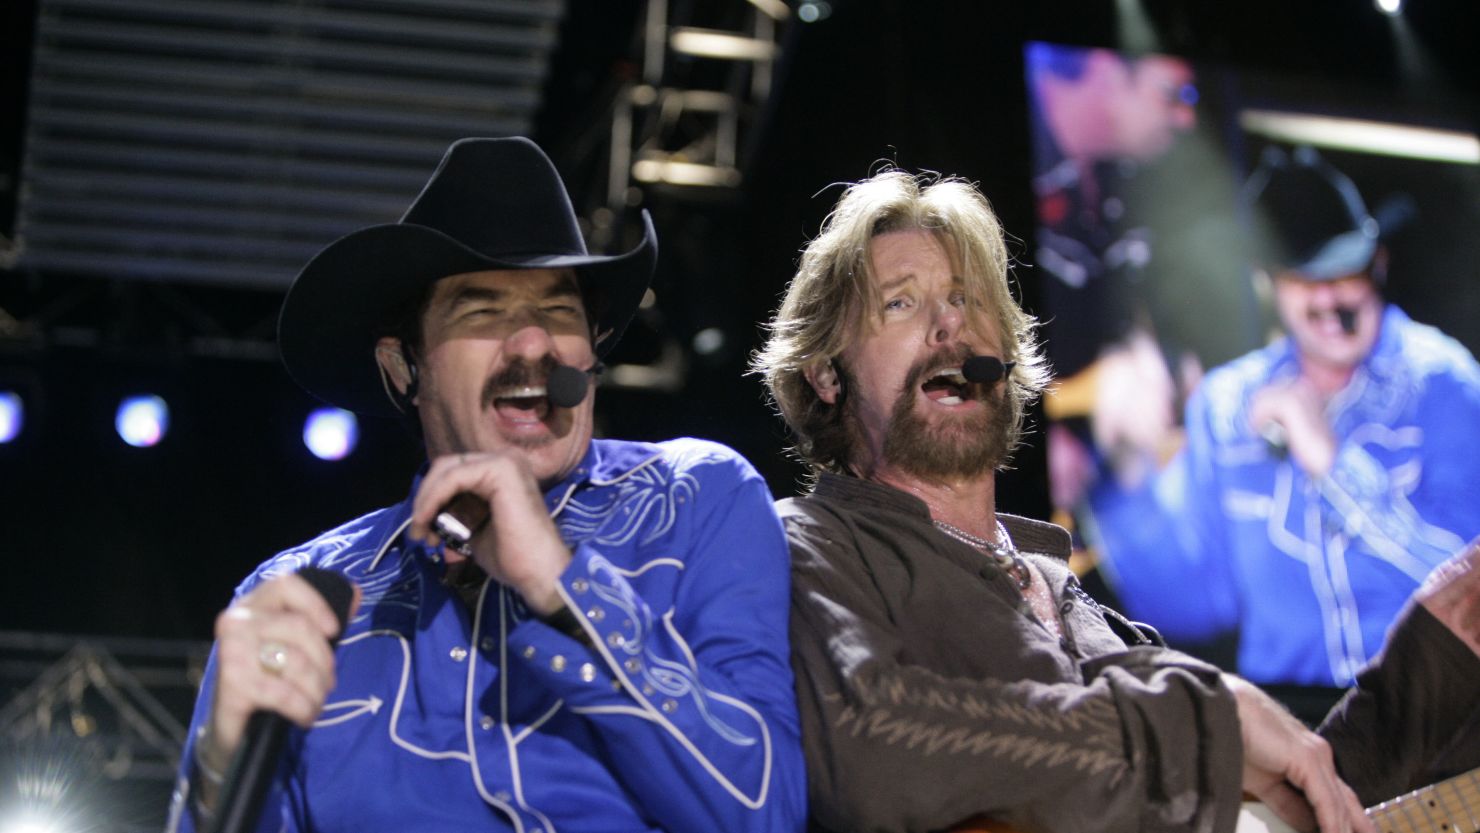 Kix Brooks and Ronnie Dunn of Brooks & Dunn, whose song "Only in America" is used by both Democratic and GOP campaigns.